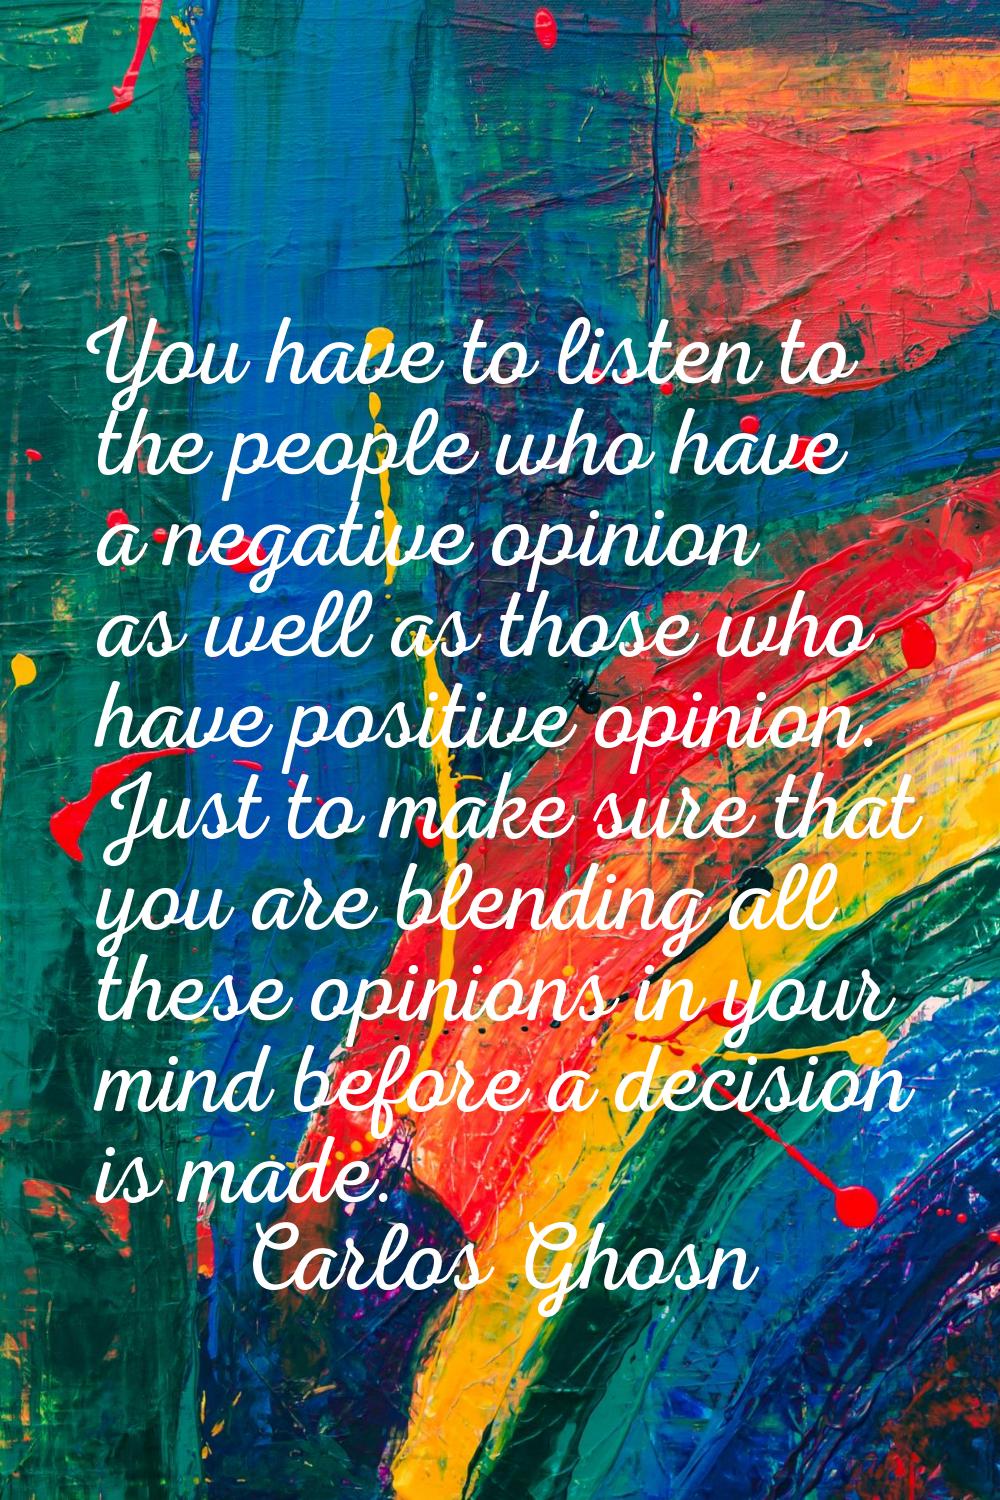 You have to listen to the people who have a negative opinion as well as those who have positive opi